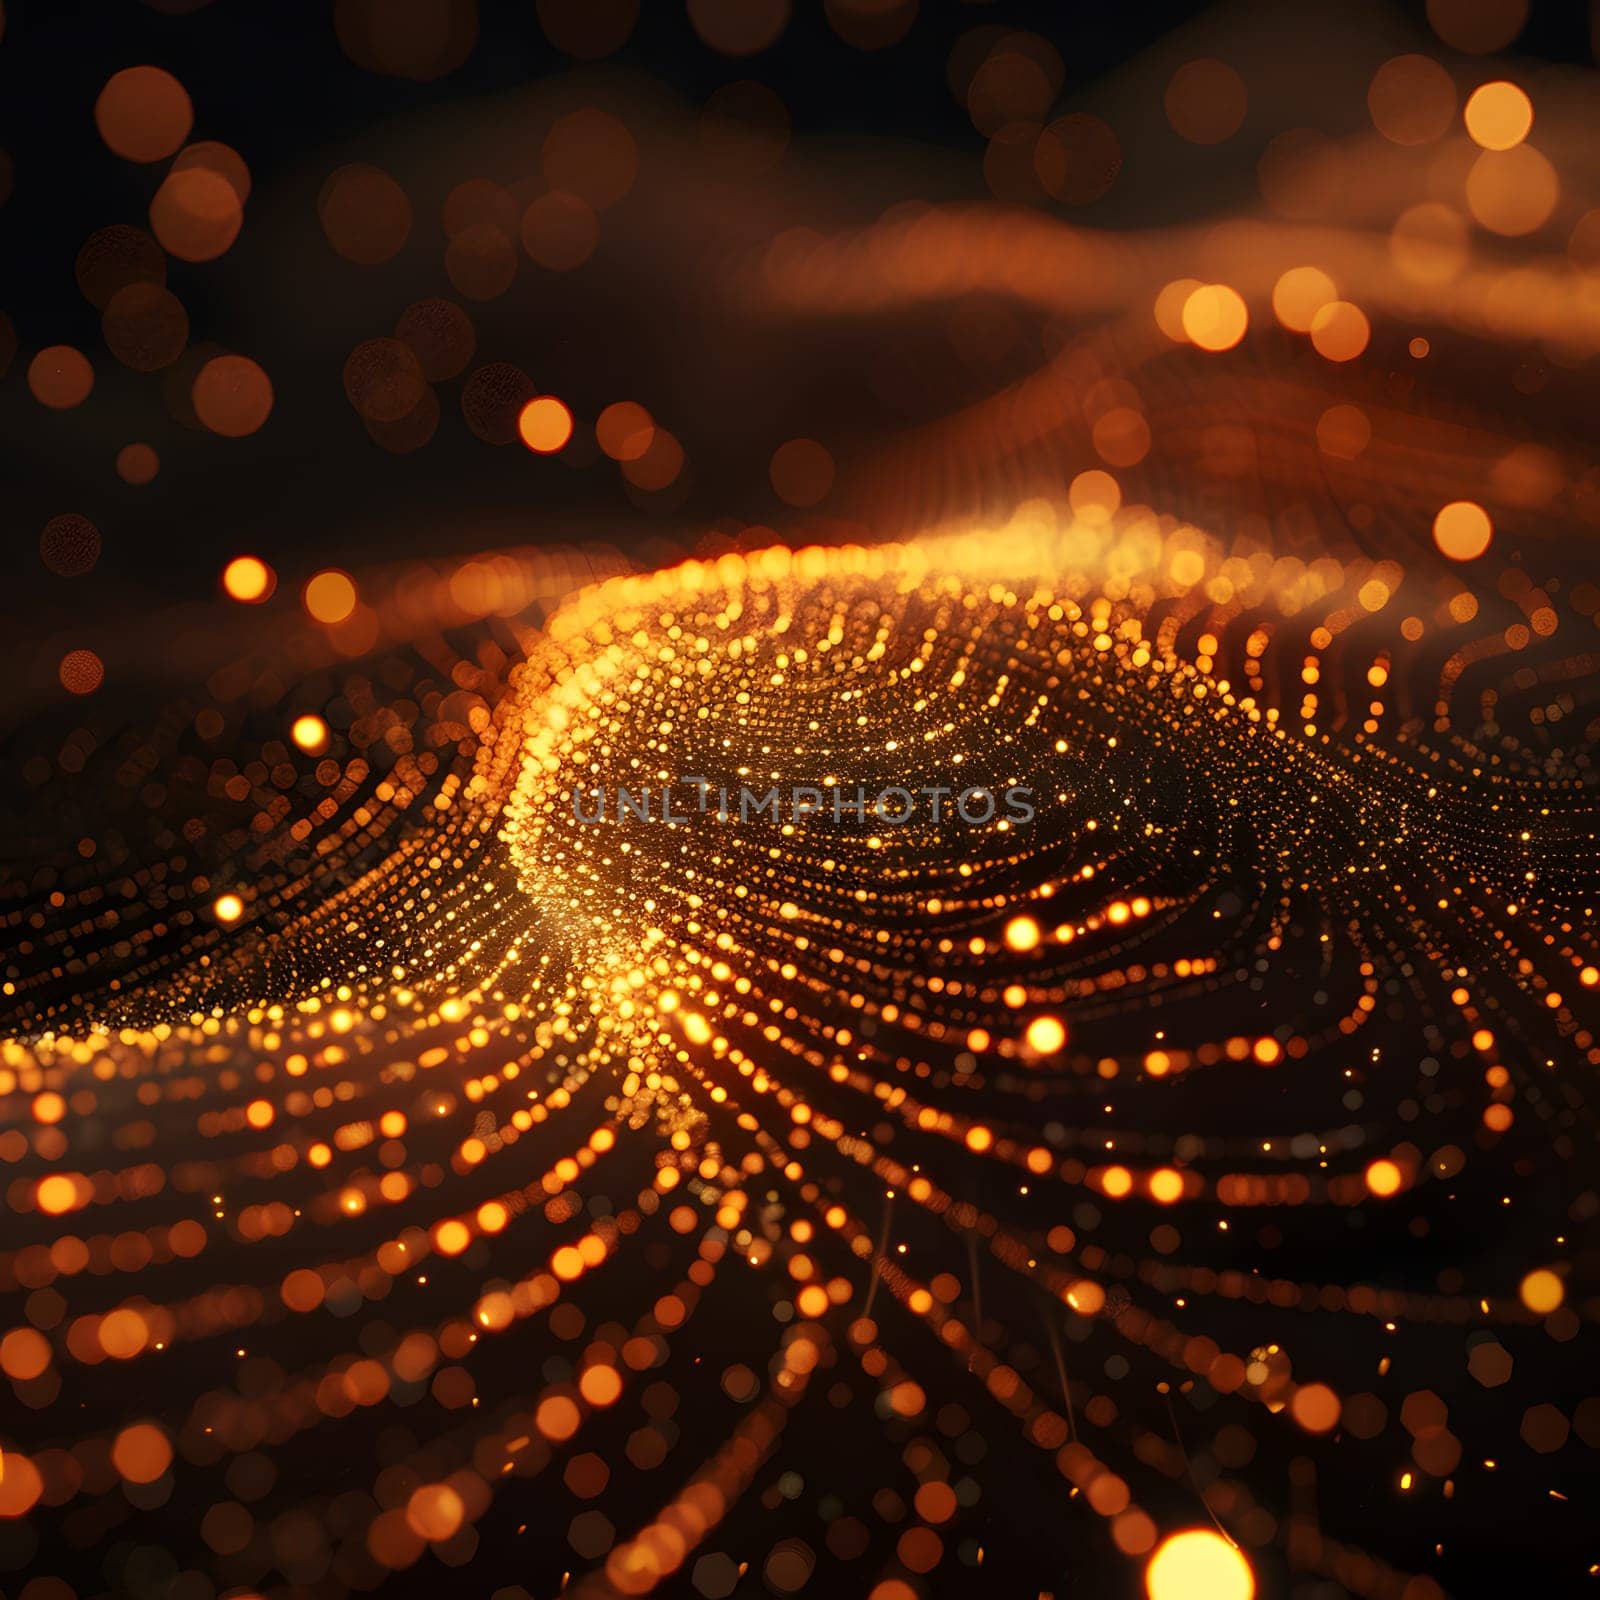 A computer generated image of a swirling mass of golden particles resembling liquid gold. The intricate pattern resembles a closeup of a swirling vortex in a mysterious event